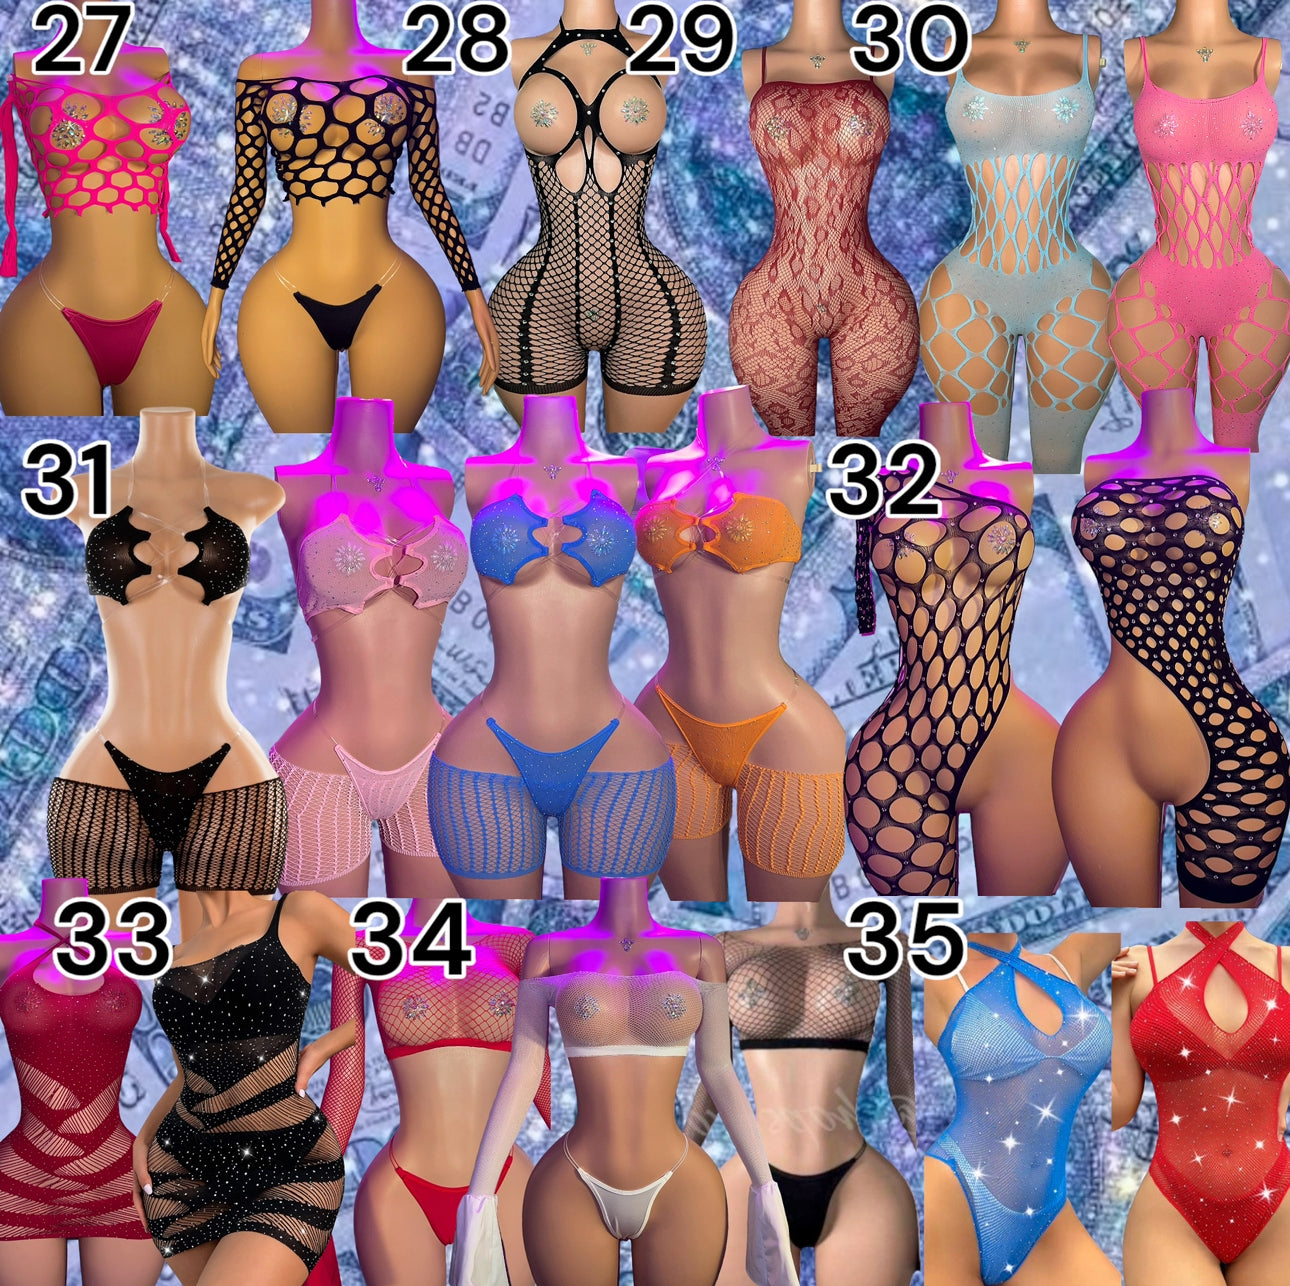 WHOLESALE FISHNETS 16-50 PIECES FITS XS-L (CHOSEN AUTOMATICALLY OR EMAIL TO CHOOSE)